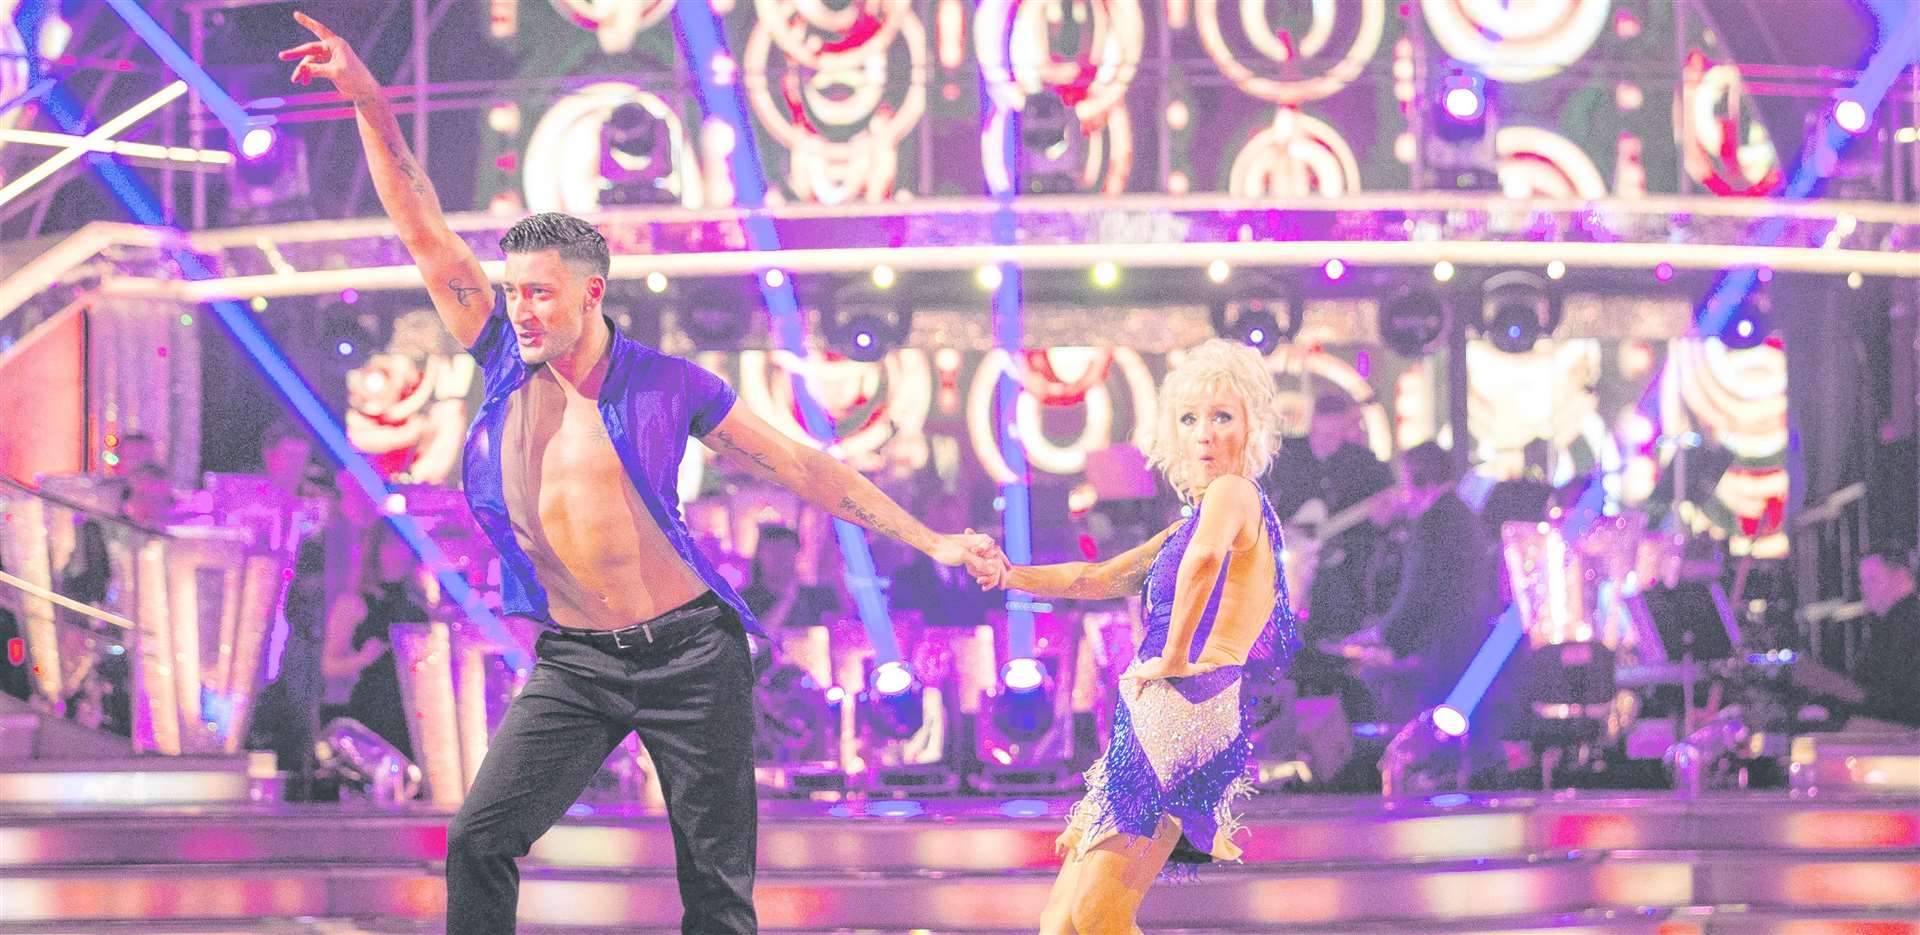 Strictly Come Dancing 2017 with Debbie McGee and Giovanni Pernice.